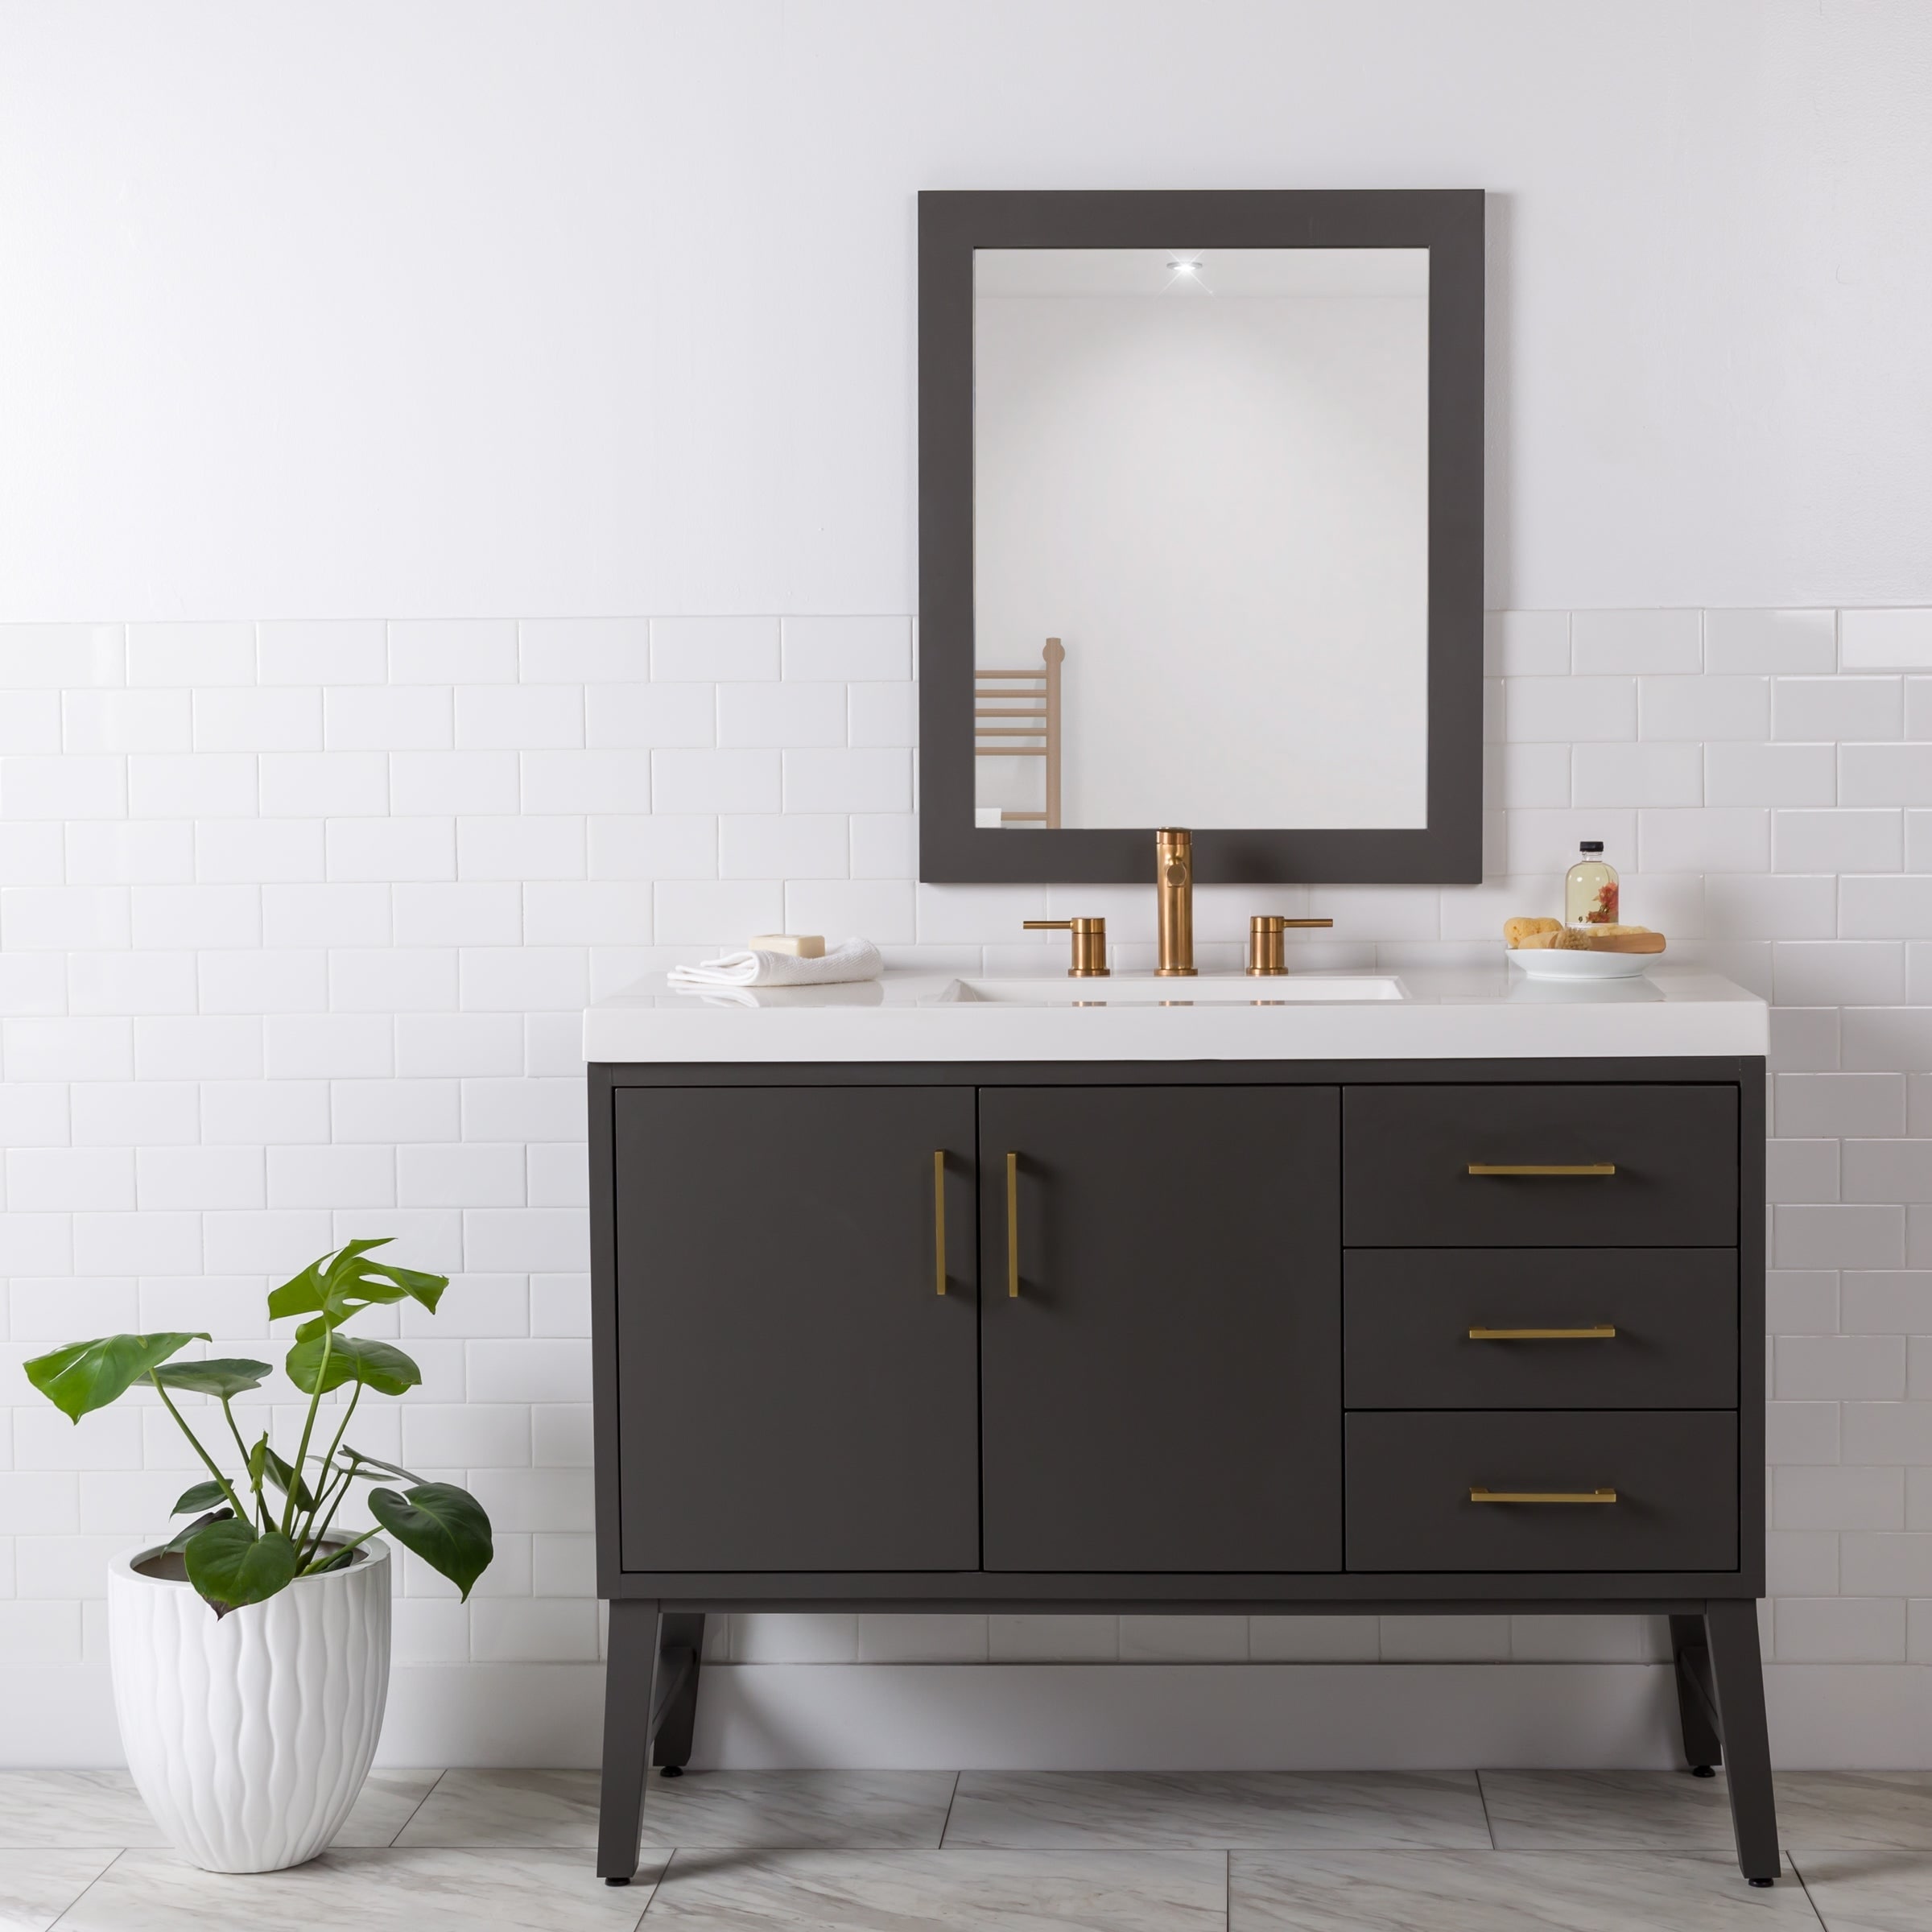 https://ak1.ostkcdn.com/images/products/is/images/direct/4710d2cbef69e2bee1a03dd76dc7927fedc31084/Spring-Mill-Cabinets-48%22-Darya-Bathroom-Vanity-With-2-Doors%2C-3-Drawers%2C-and-White-Sink-Top.jpg